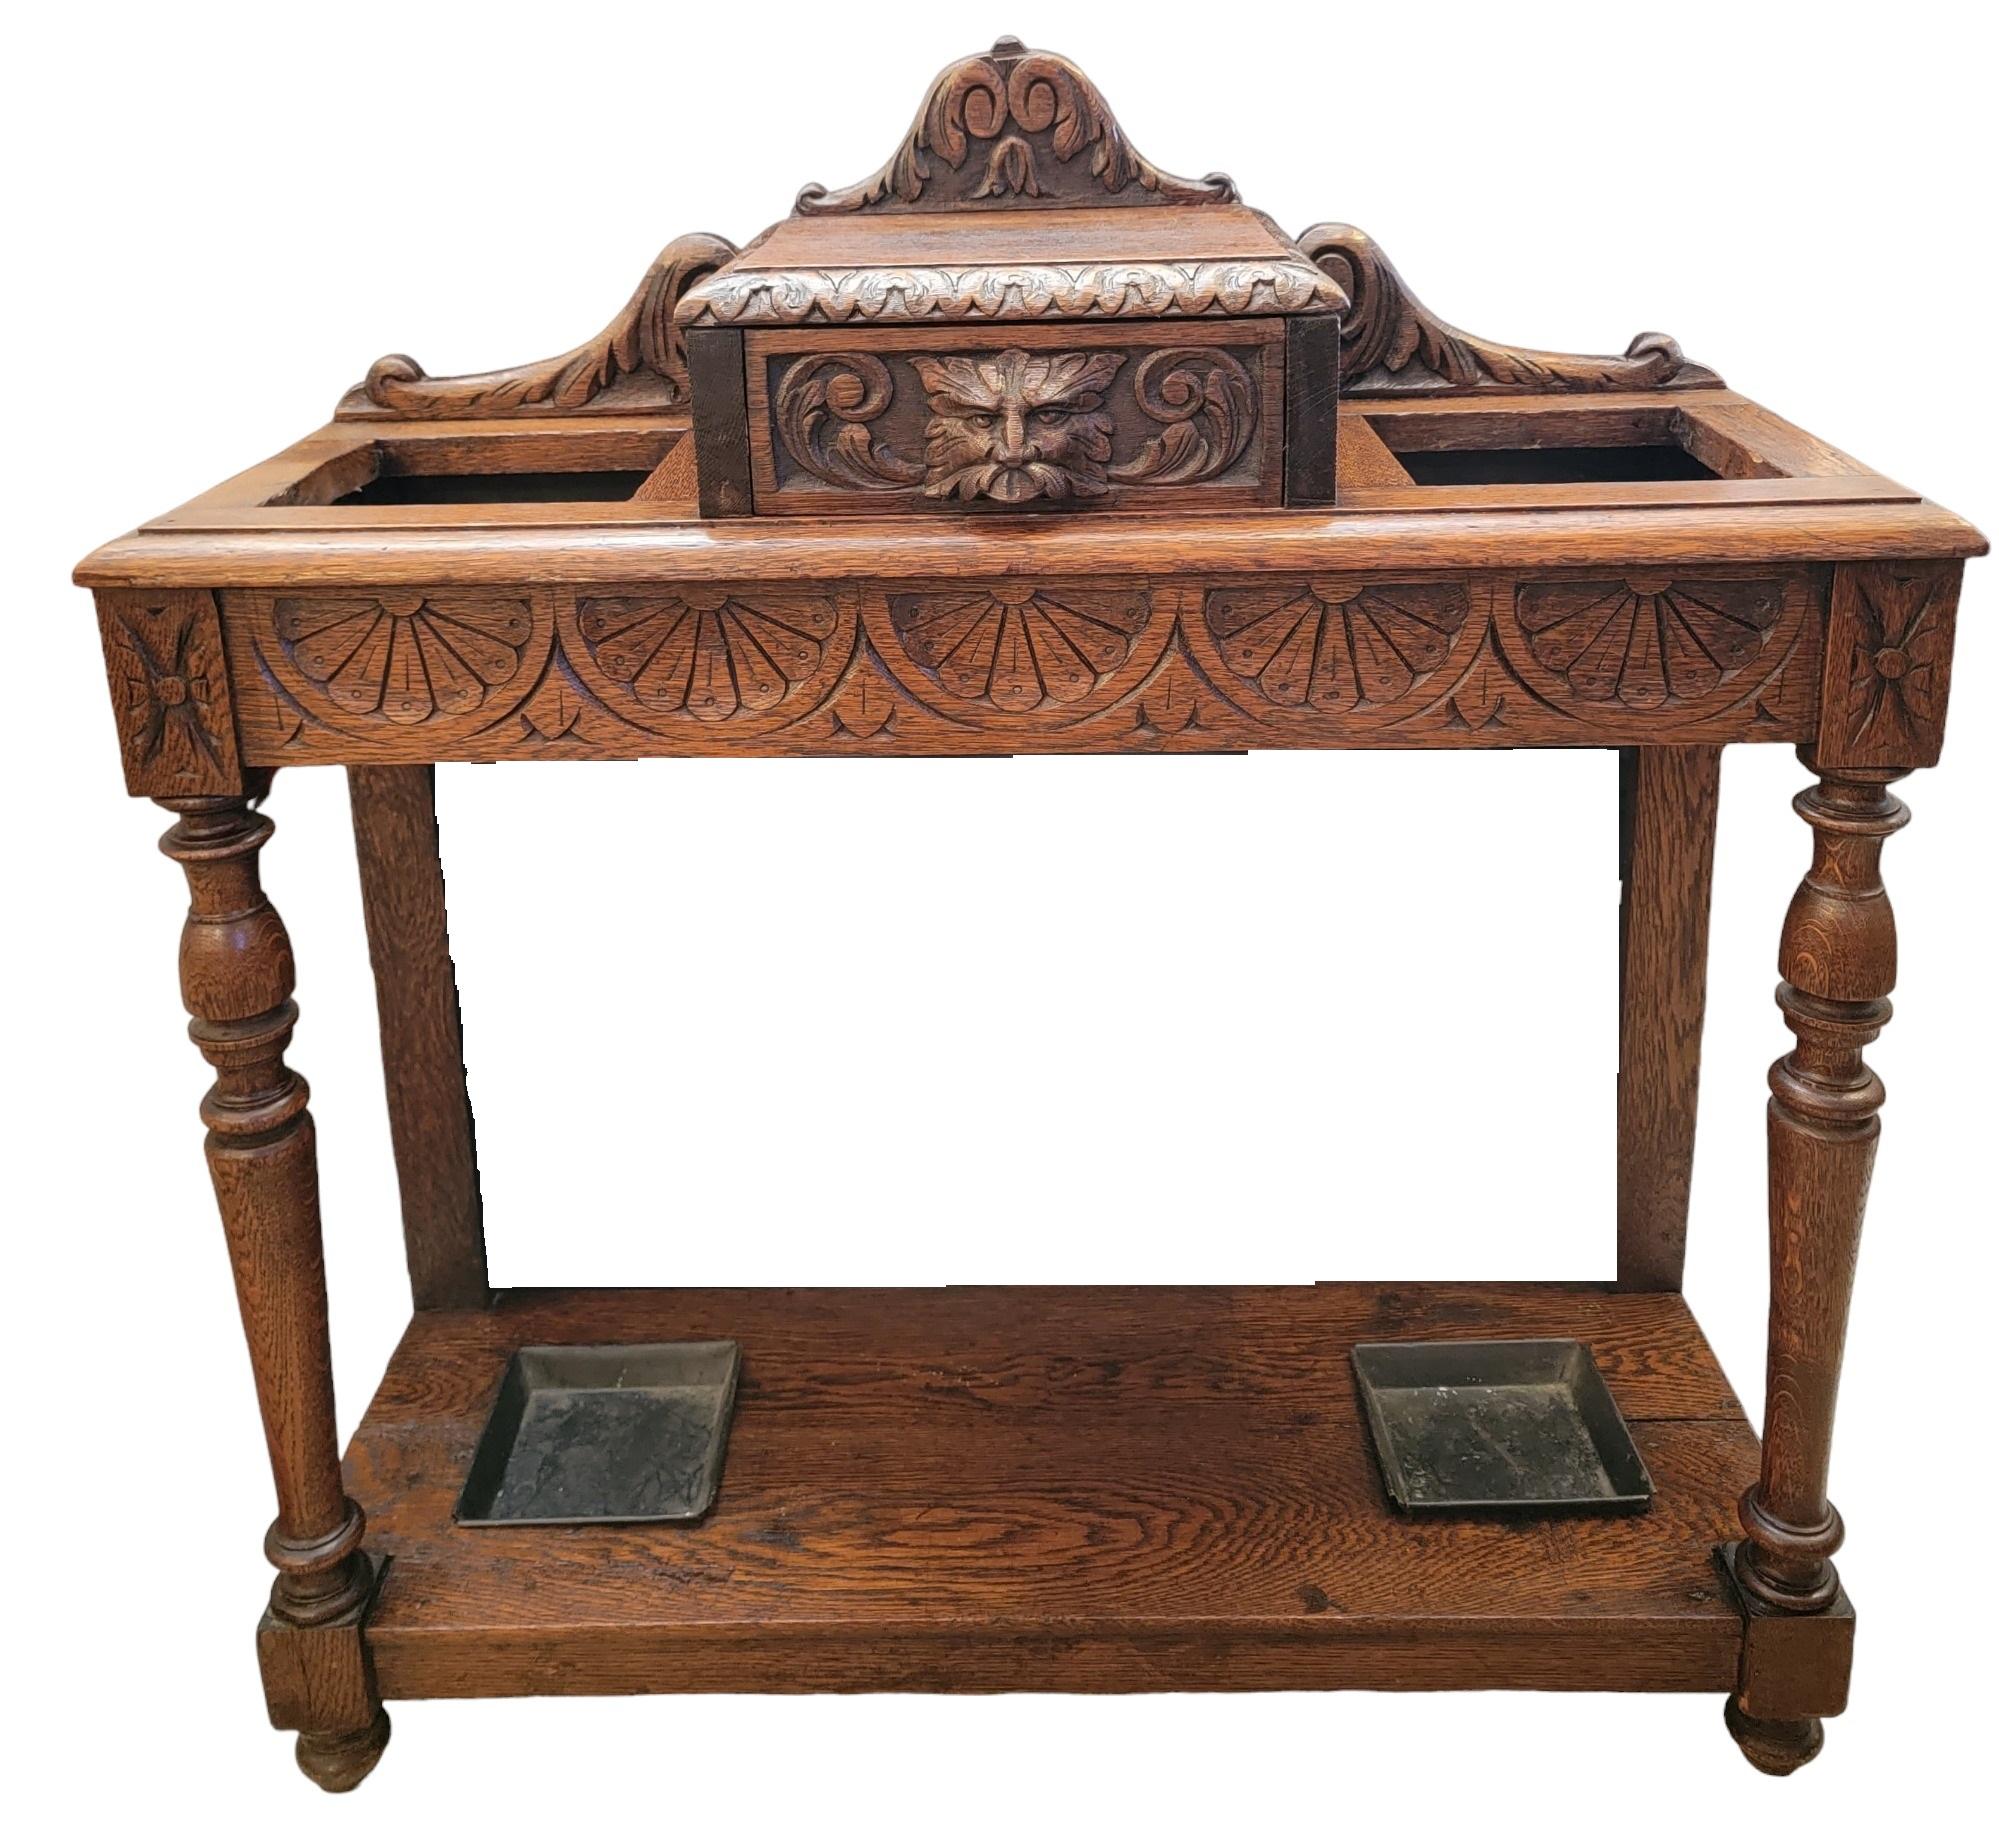 19thc English Oak Umbrella Console Table. has two square cut out perpendicular to one another on each side. The bottom cut out has a metal tray to hold the umbrellas up and when used to catch and liquid that may drop off of the umbrella. May be used